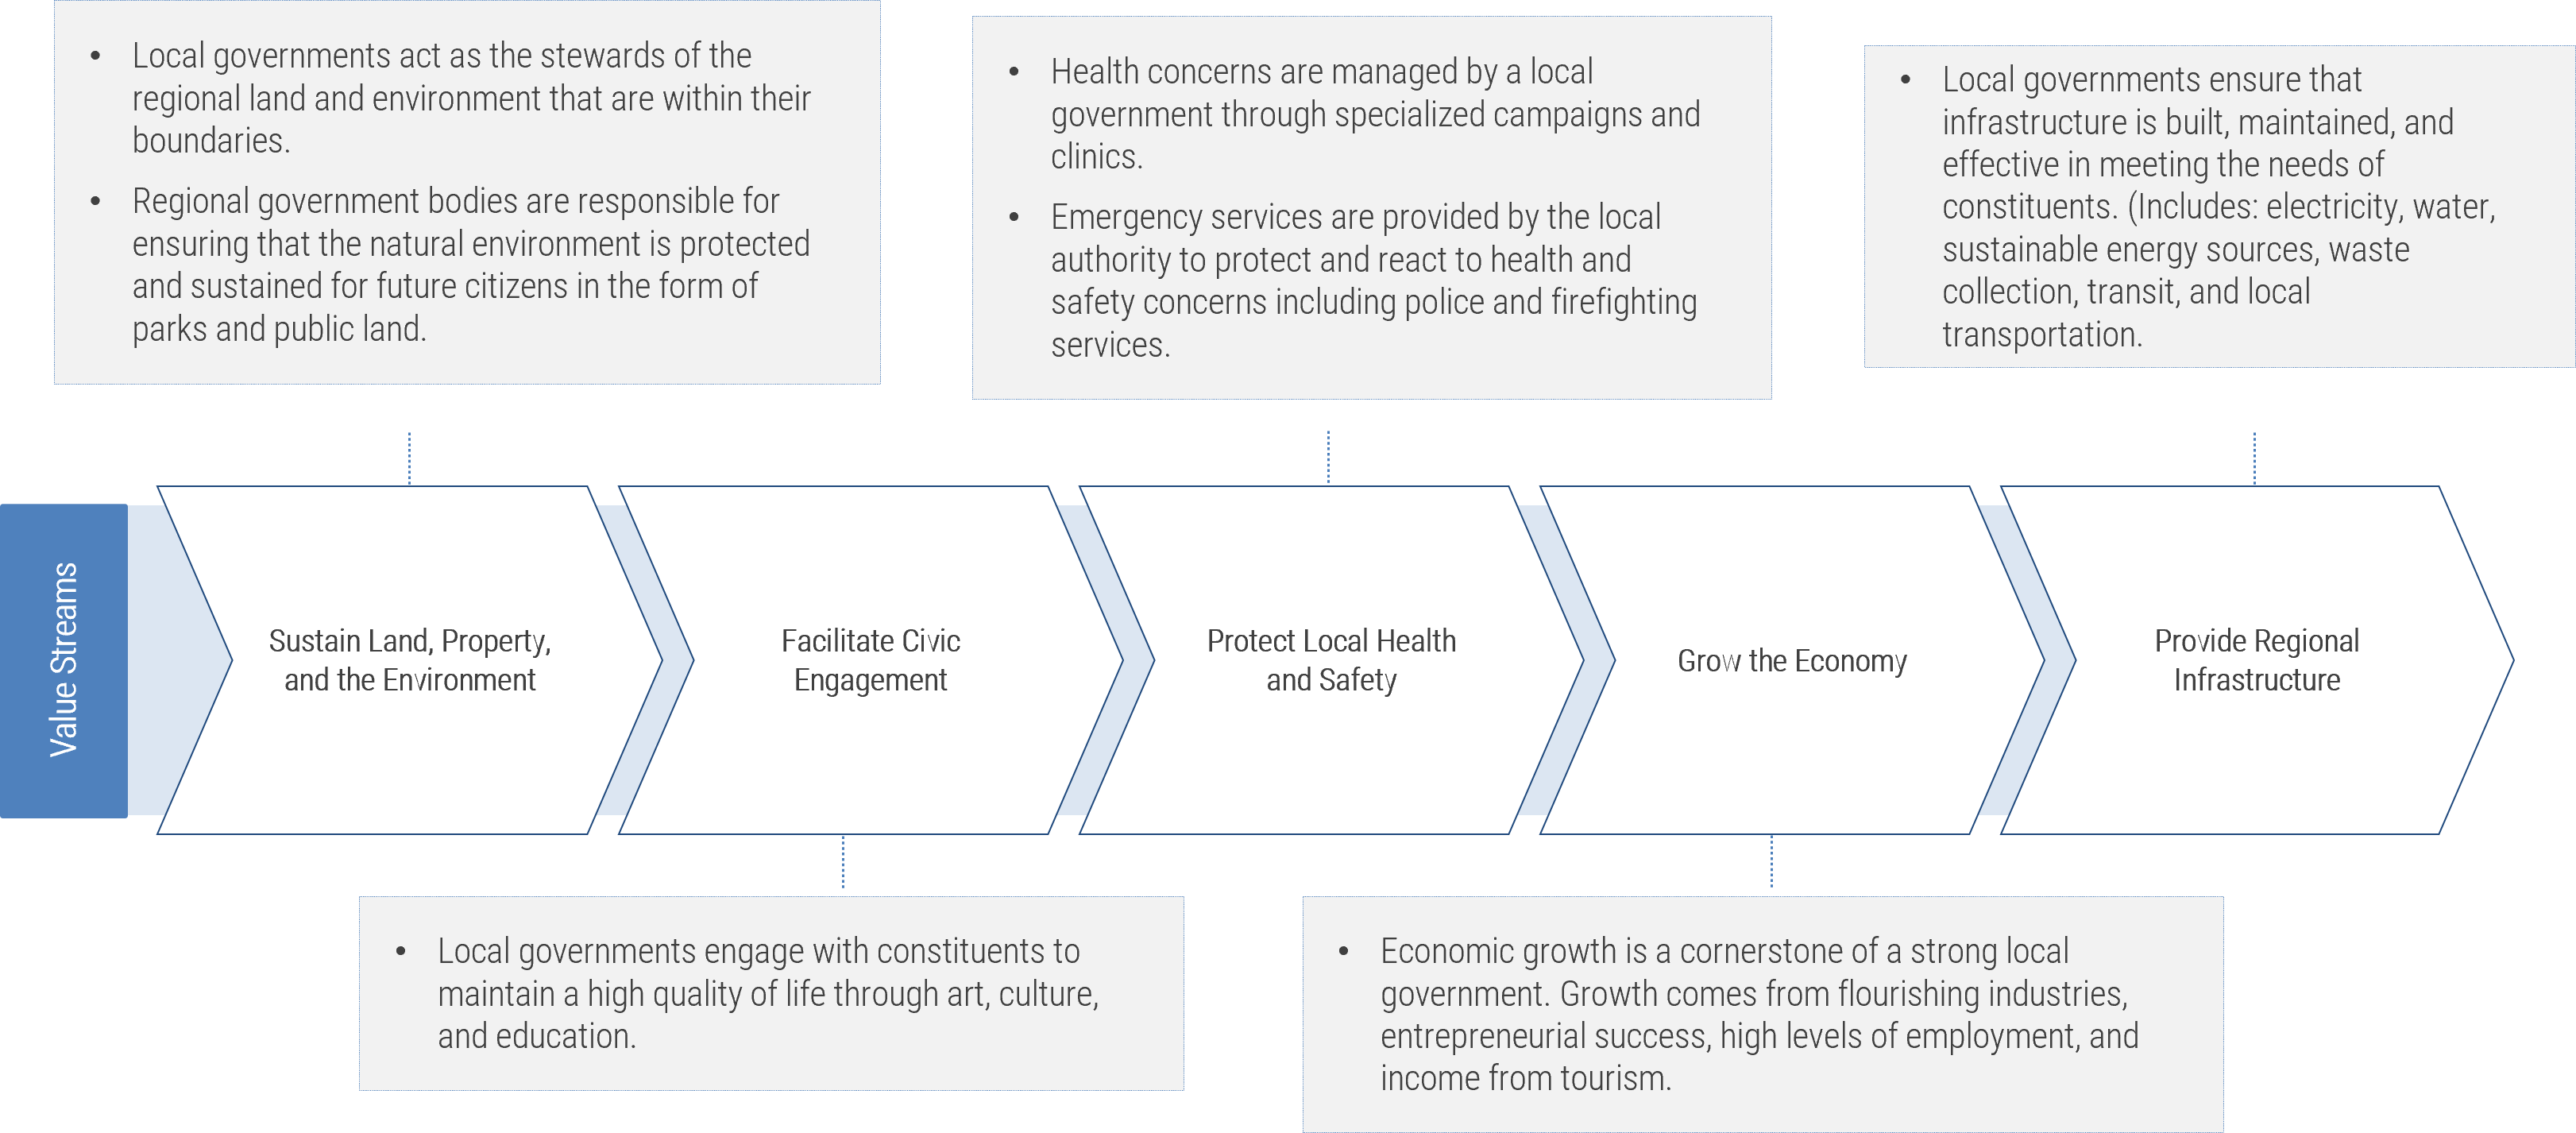 Example Value Stream for Local Government with five value chains. 'Sustain Land, Property, and the Environment: Local governments act as the stewards of the regional land and environment that are within their boundaries; Regional government bodies are responsible for ensuring that the natural environment is protected and sustained for future citizens in the form of parks and public land.' 'Facilitate Civic Engagement: Local governments engage with constituents to maintain a high quality of life through art, culture, and education.' 'Protect Local Health and Safety: Health concerns are managed by a local government through specialized campaigns and clinics; Emergency services are provided by the local authority to protect and react to health and safety concerns including police and firefighting services.' 'Grow the Economy: Economic growth is a cornerstone of a strong local government. Growth comes from flourishing industries, entrepreneurial success, high levels of employment, and income from tourism.' 'Provide Regional Infrastructure: Local governments ensure that infrastructure is built, maintained, and effective in meeting the needs of constituents. (Includes: electricity, water, sustainable energy sources, waste collection, transit, and local transportation.'